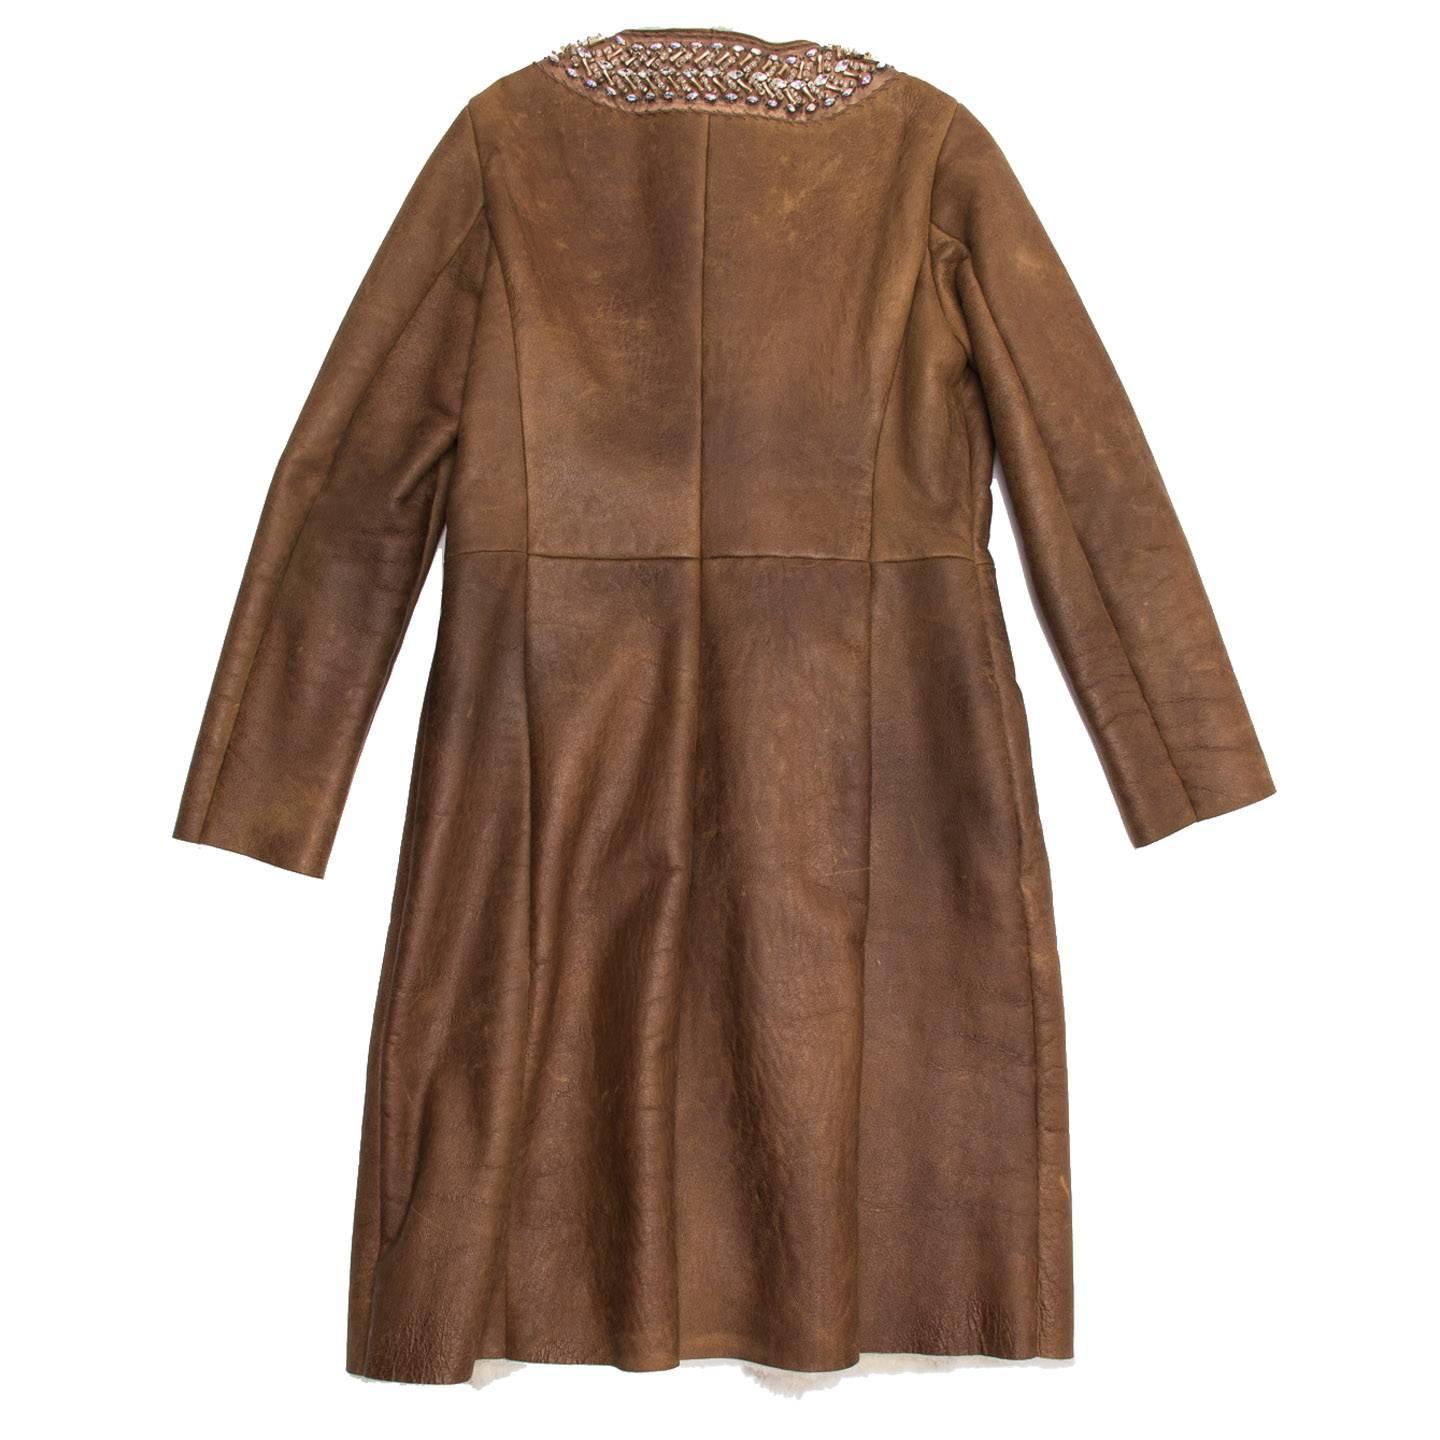 Toffee brown naturally distressed leather coat with shearling lining and mink fur trim down center front, single welt pockets at front. Hand stitched satin trim around neckline with beading and crystals.

Size  46 Italian sizing
Condition 